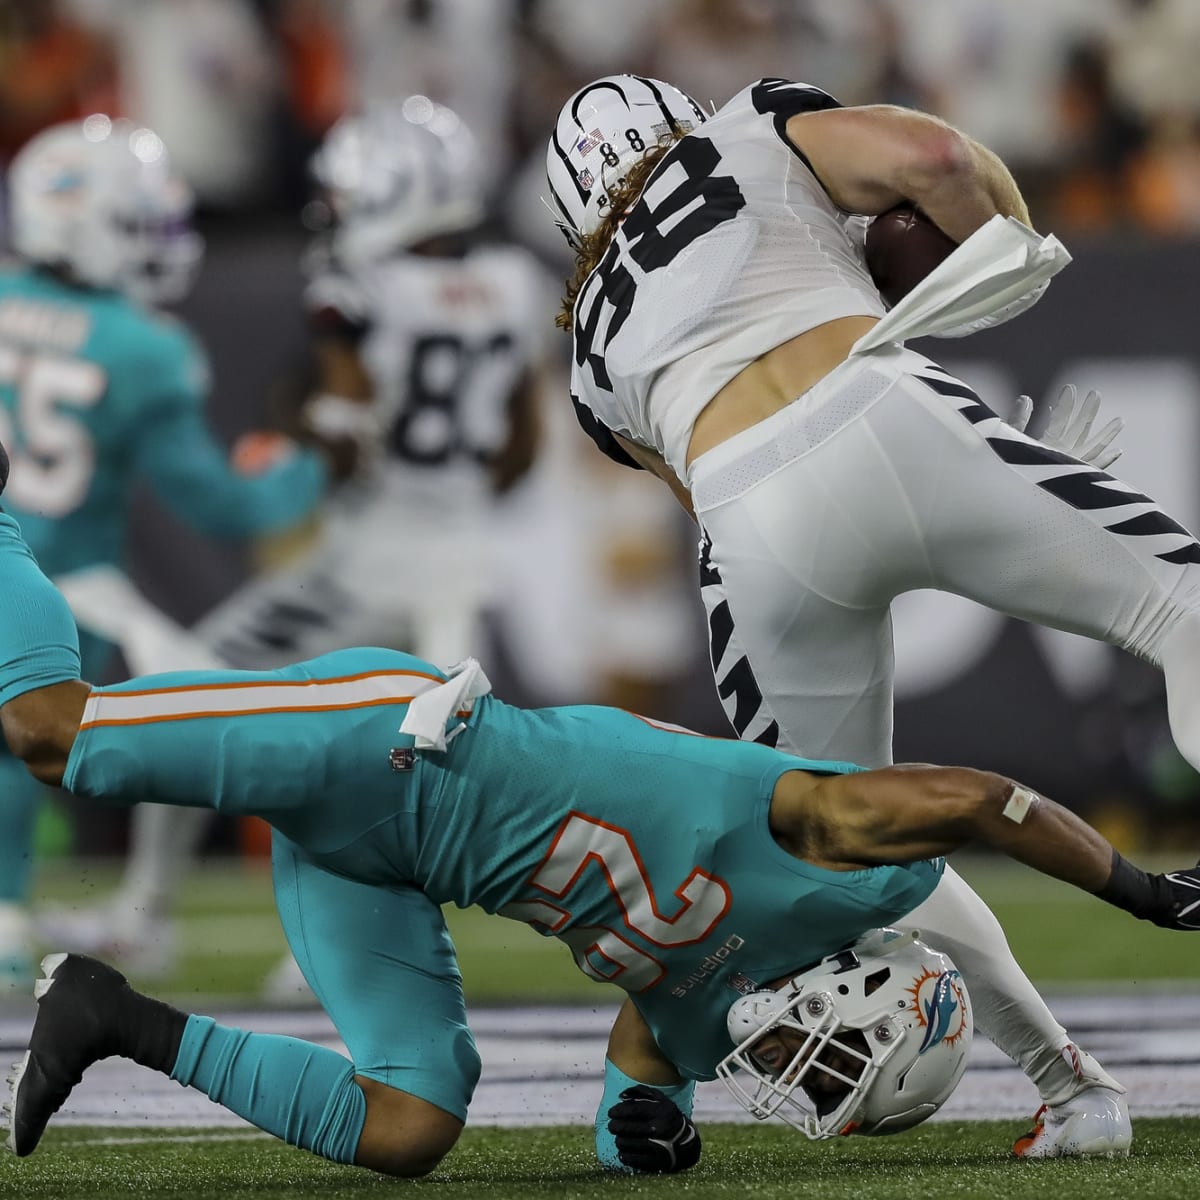 Miami Dolphins 15 vs 27 Cincinnati Bengals summary: stats and highlights,  update on Tua Tagovailoa l NFL Week 4 - AS USA